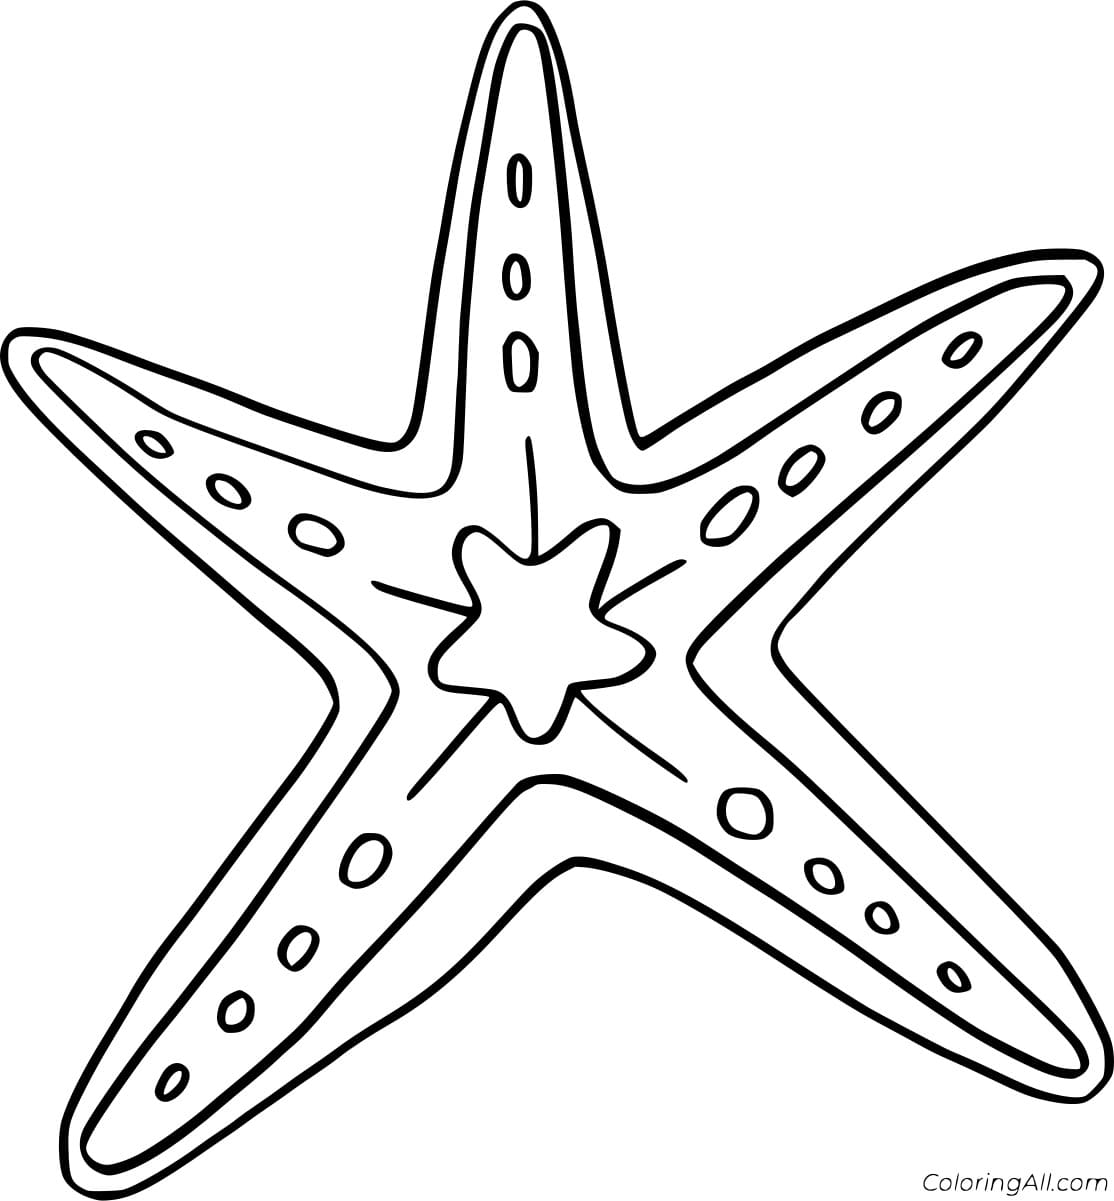 One Starfish Image Coloring Page